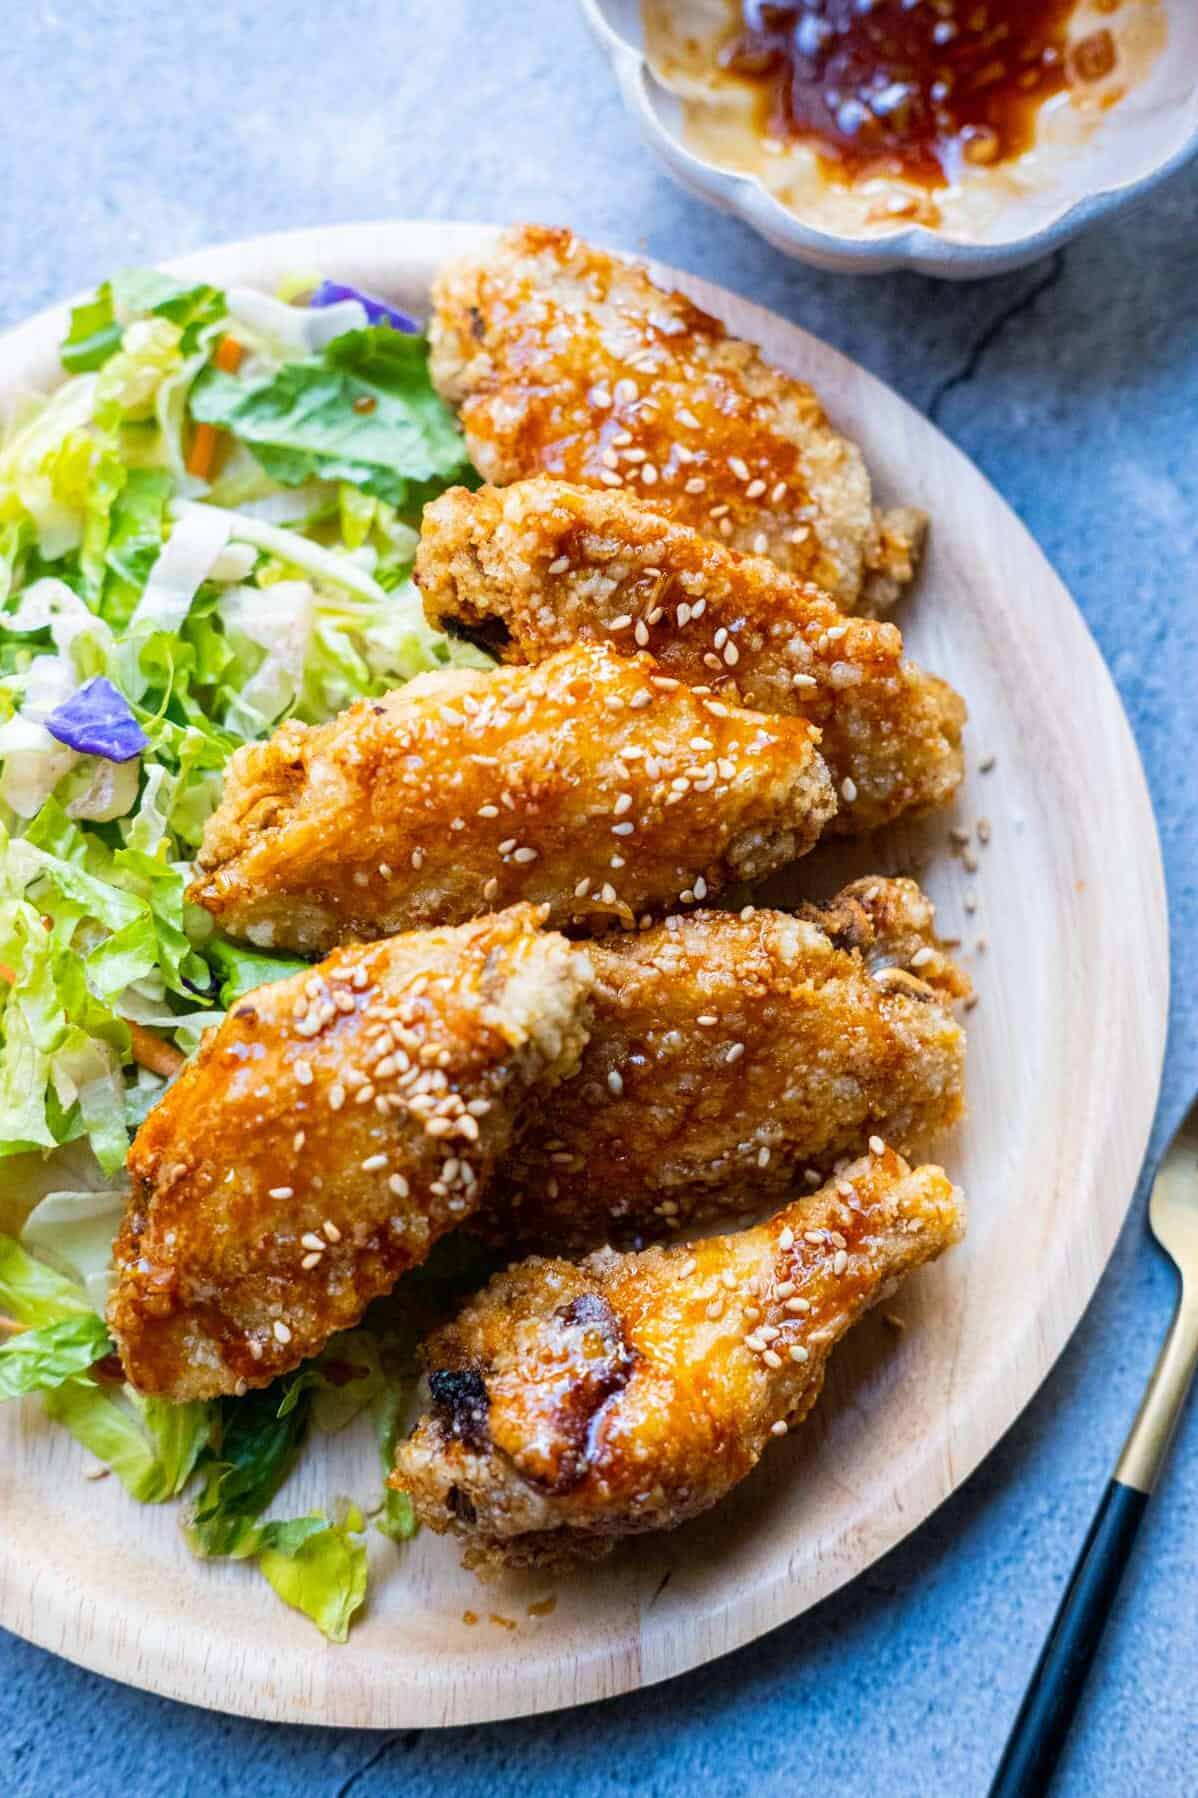  Set up a plate of tebasaki wings at your next get-together, and watch them disappear in no time!